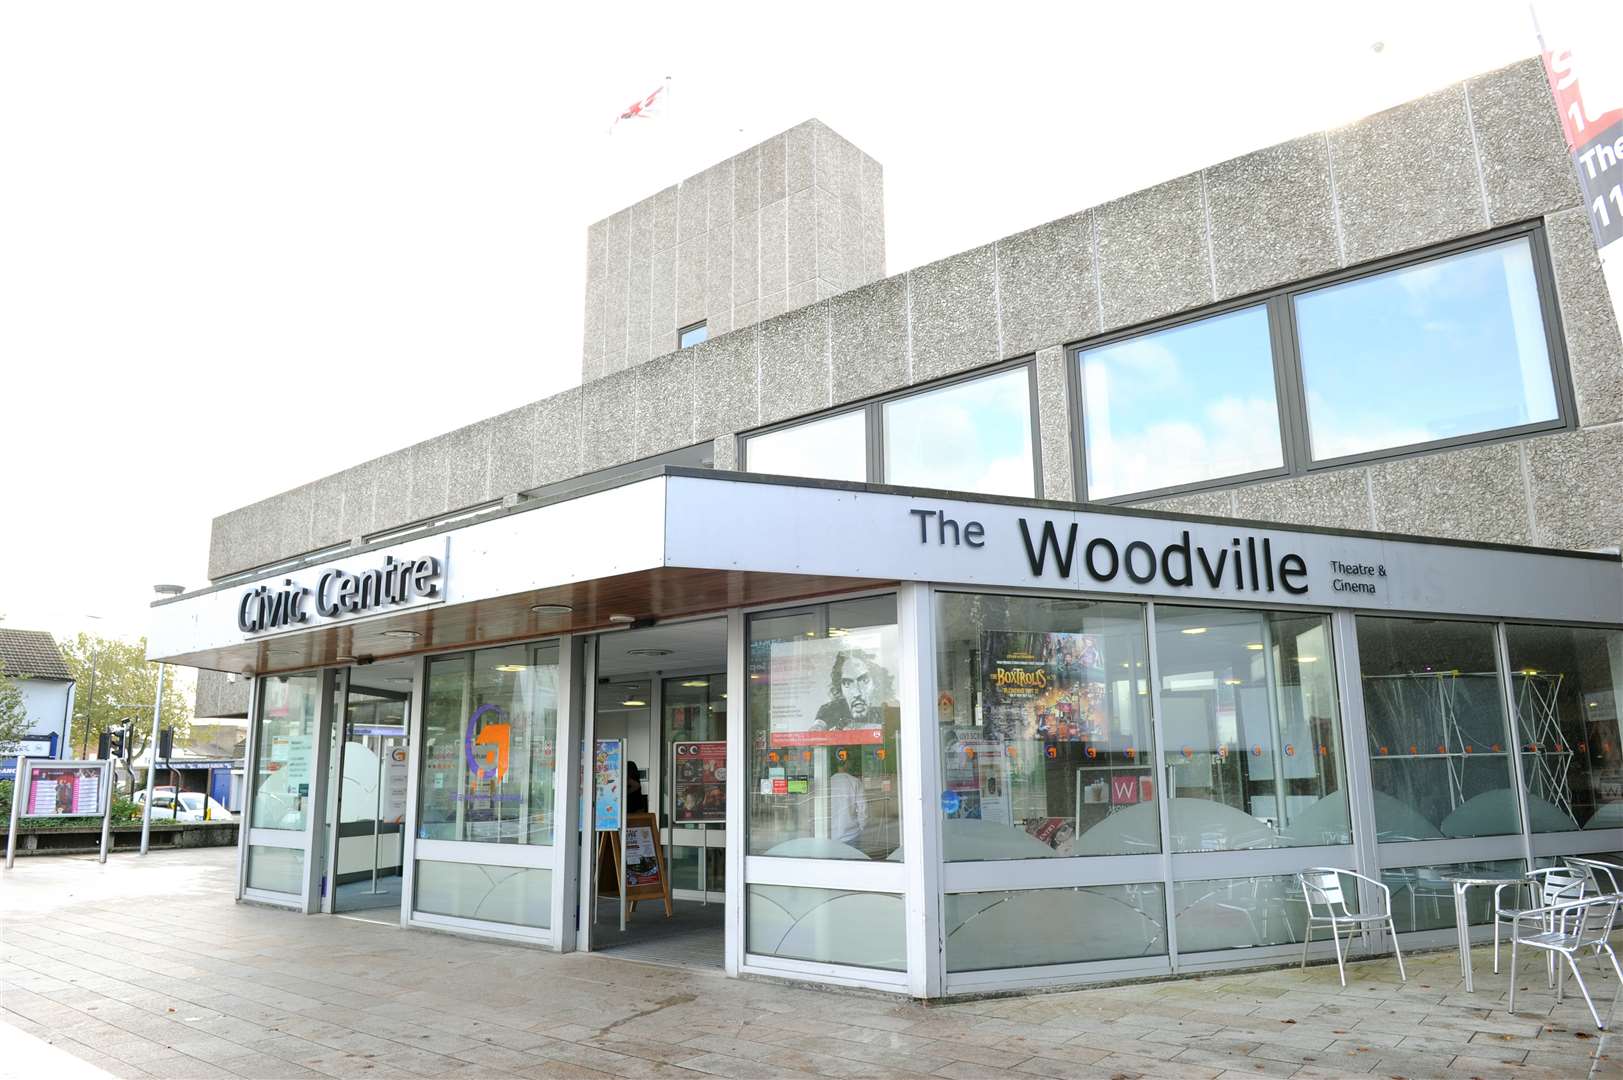 The Woodville, based in the Civic Centre in Gravesend